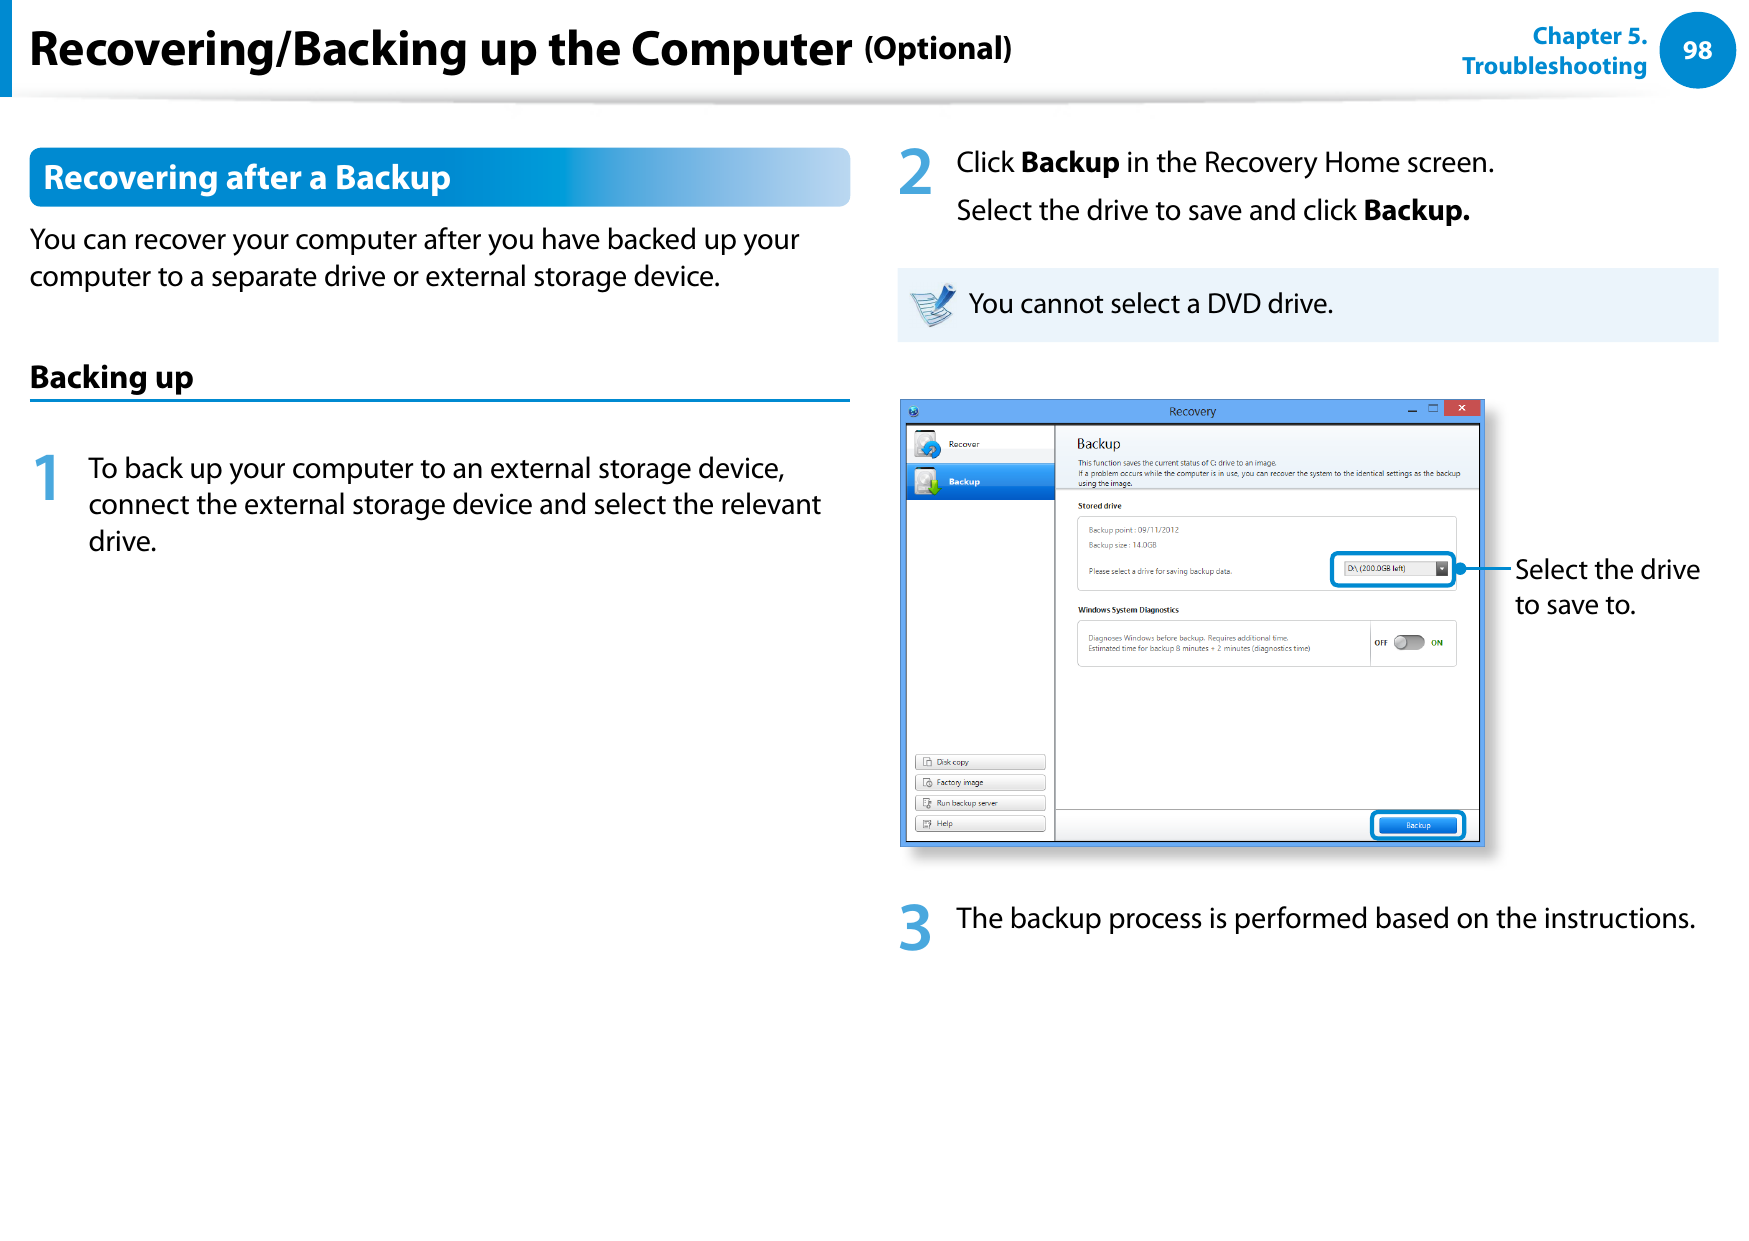 98Chapter 5.   TroubleshootingRecovering after a BackupYou can recover your computer after you have backed up your computer to a separate drive or external storage device.Backing up1  To back up your computer to an external storage device, connect the external storage device and select the relevant drive. 2  Click Backup in the Recovery Home screen.Select the drive to save and click Backup. You cannot select a DVD drive.Select the drive to save to.3  The backup process is performed based on the instructions.Recovering/Backing up the Computer (Optional)